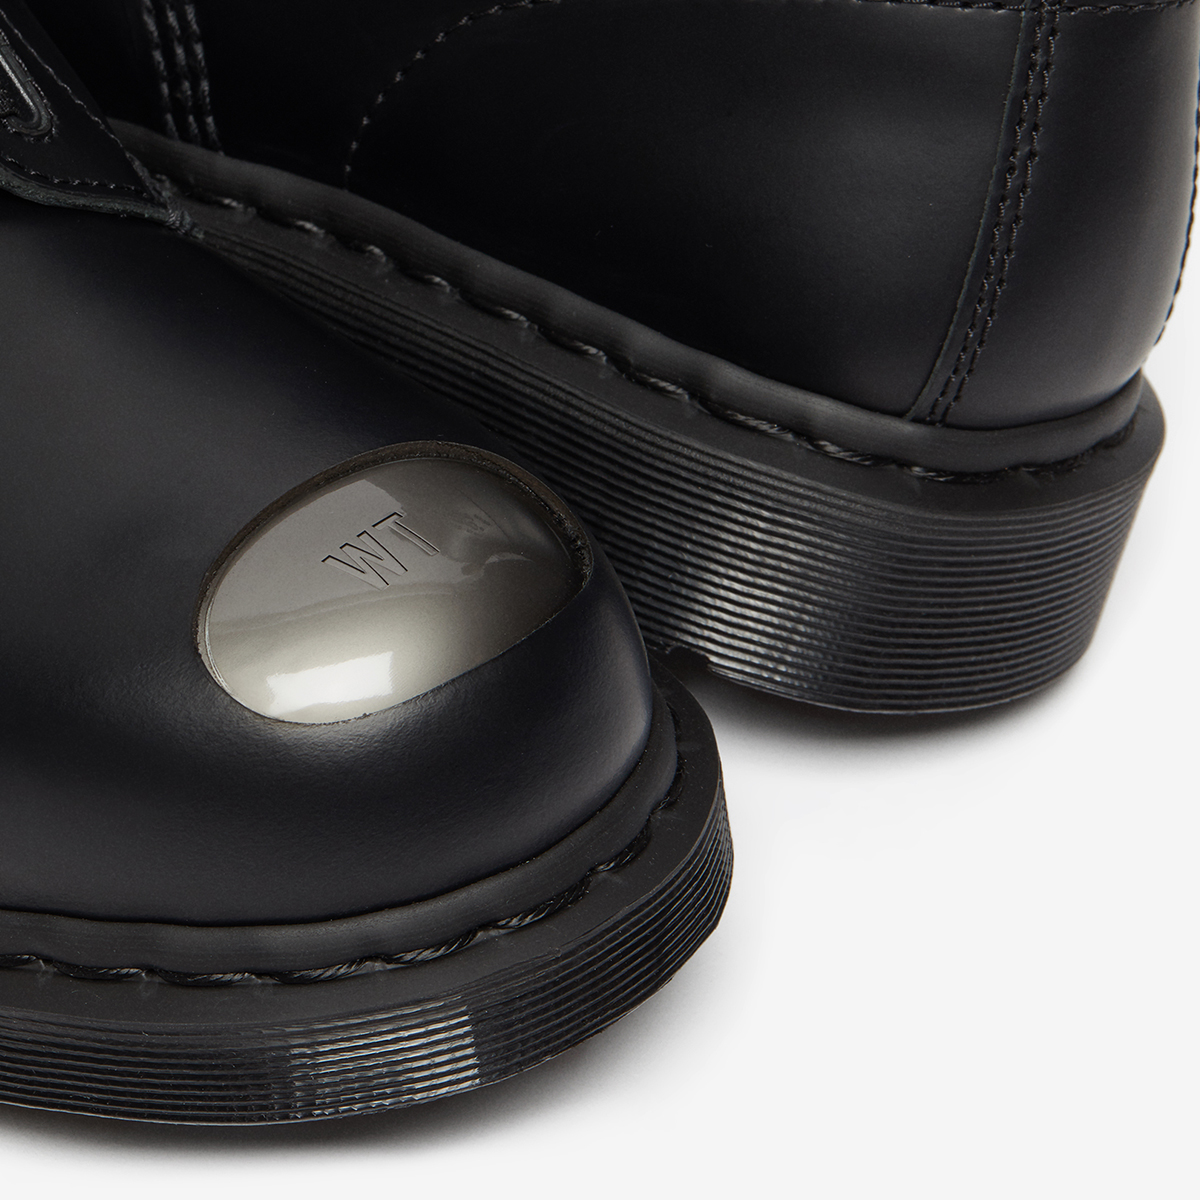 Dr. Martens x WTAPS 1460 Remastered Boot | END. (UK)